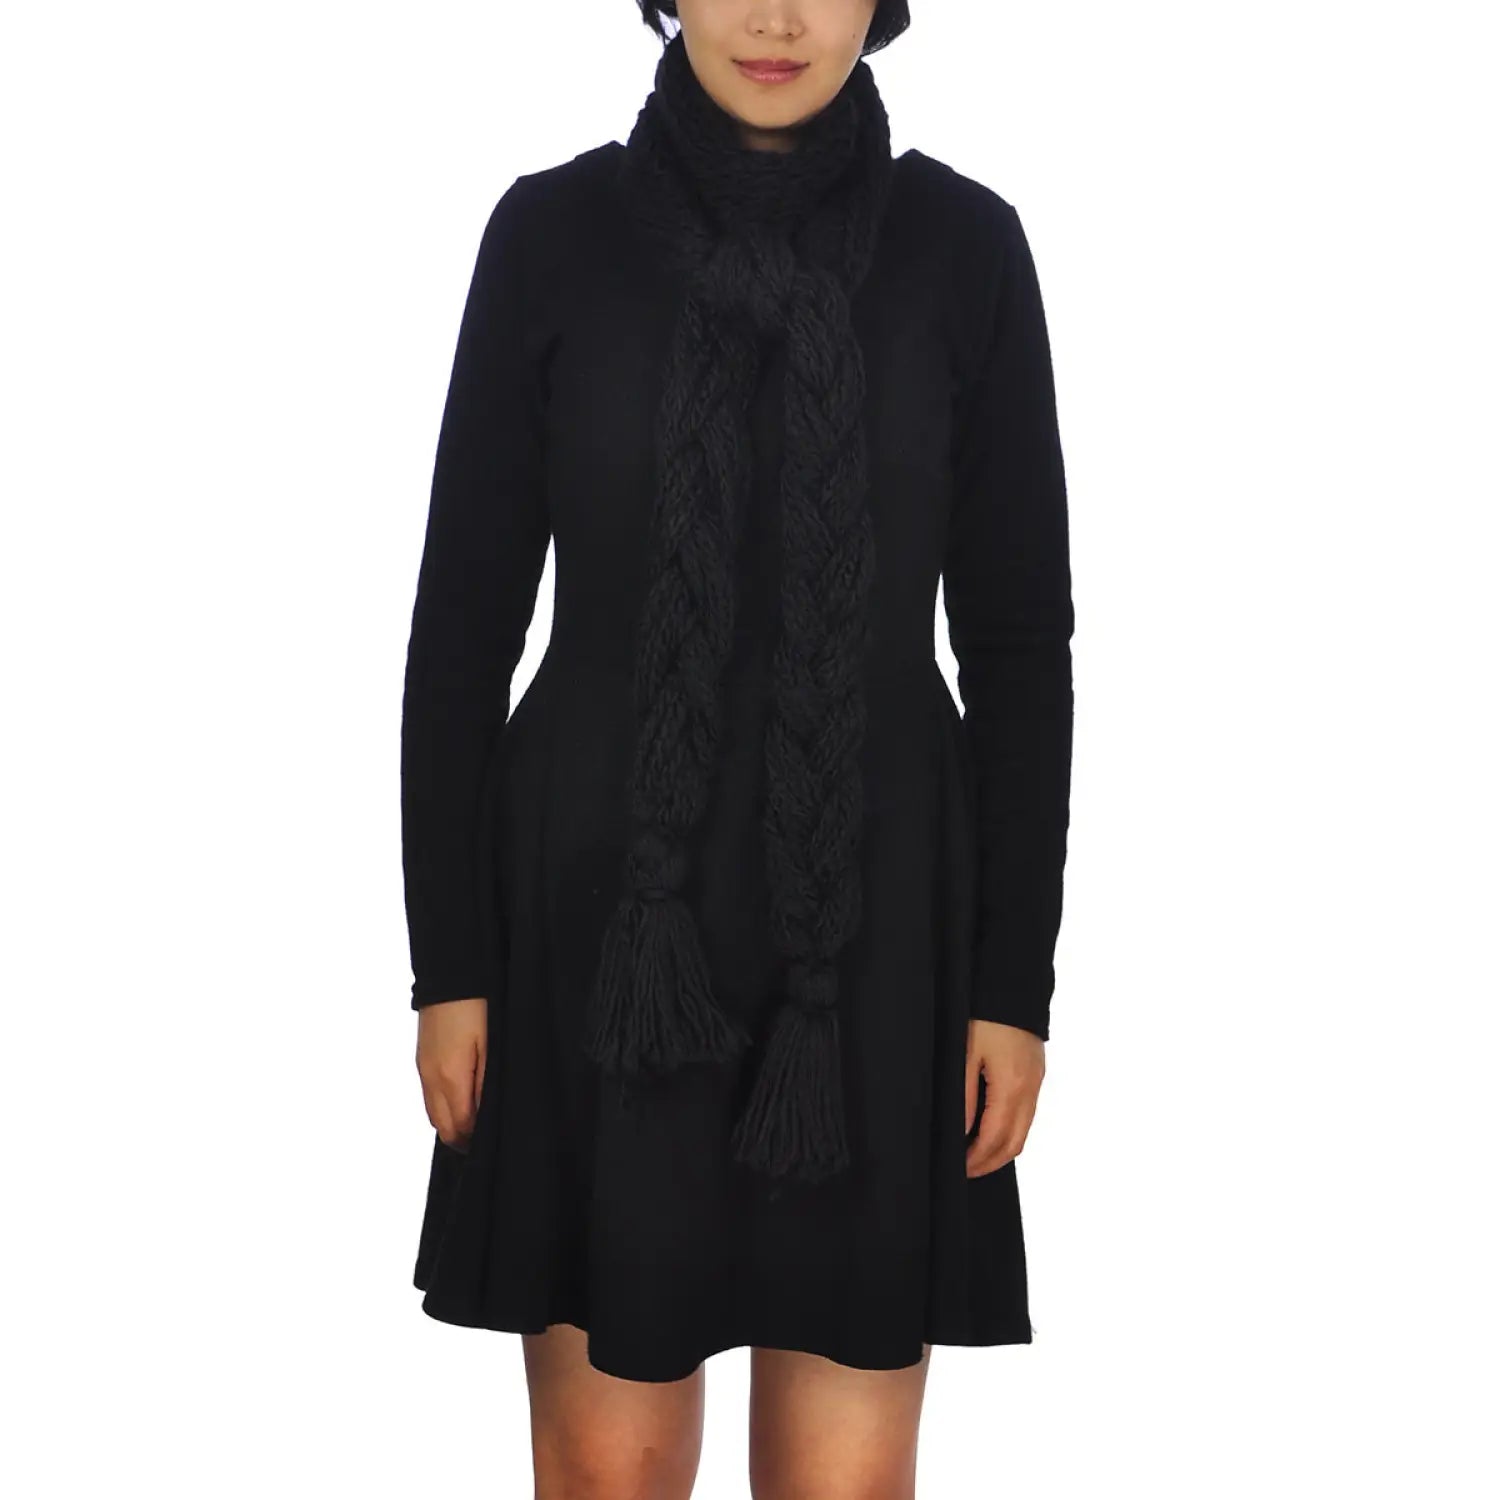 woman in black dress and scarf showcasing oversized long plait knitted scarf